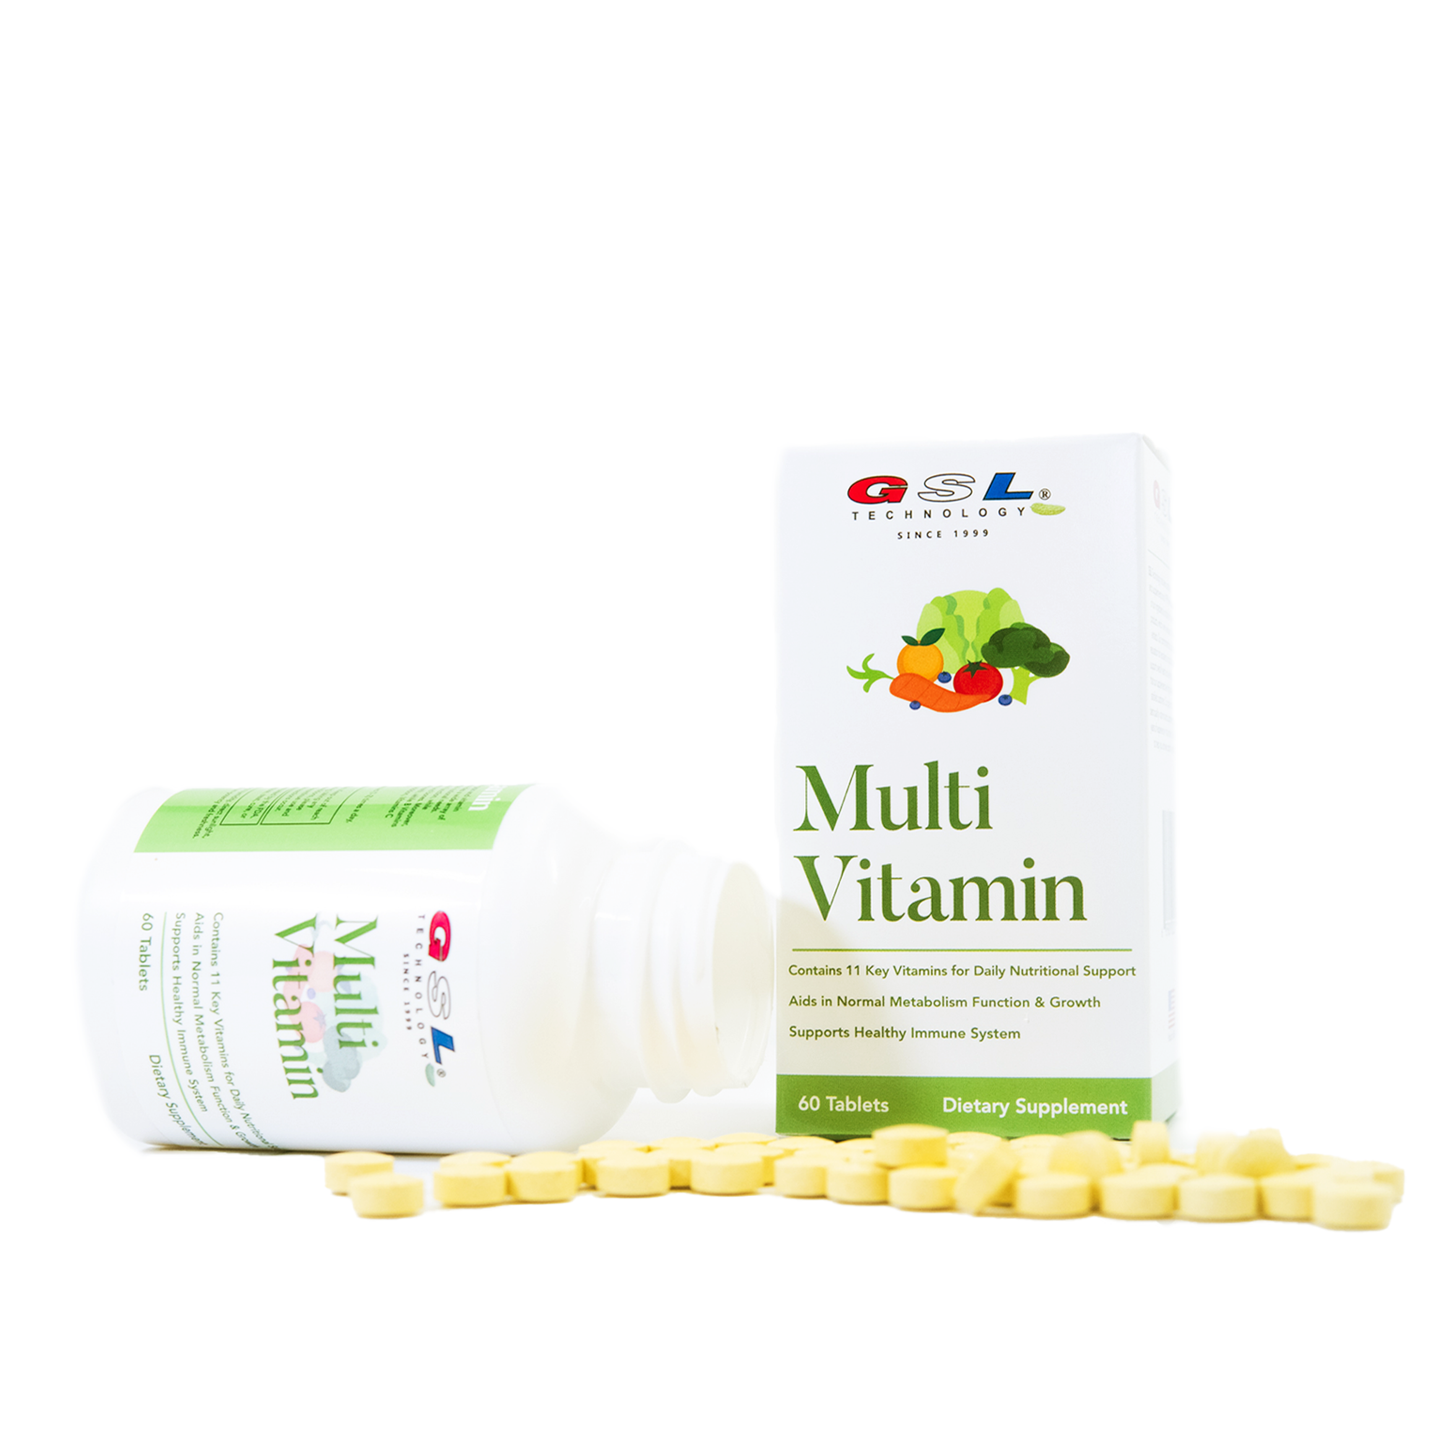 Multi-Vitamin | Contains 11 Key Vitamins for Daily Nutritional Support | for Overall Well-Being | Made in USA